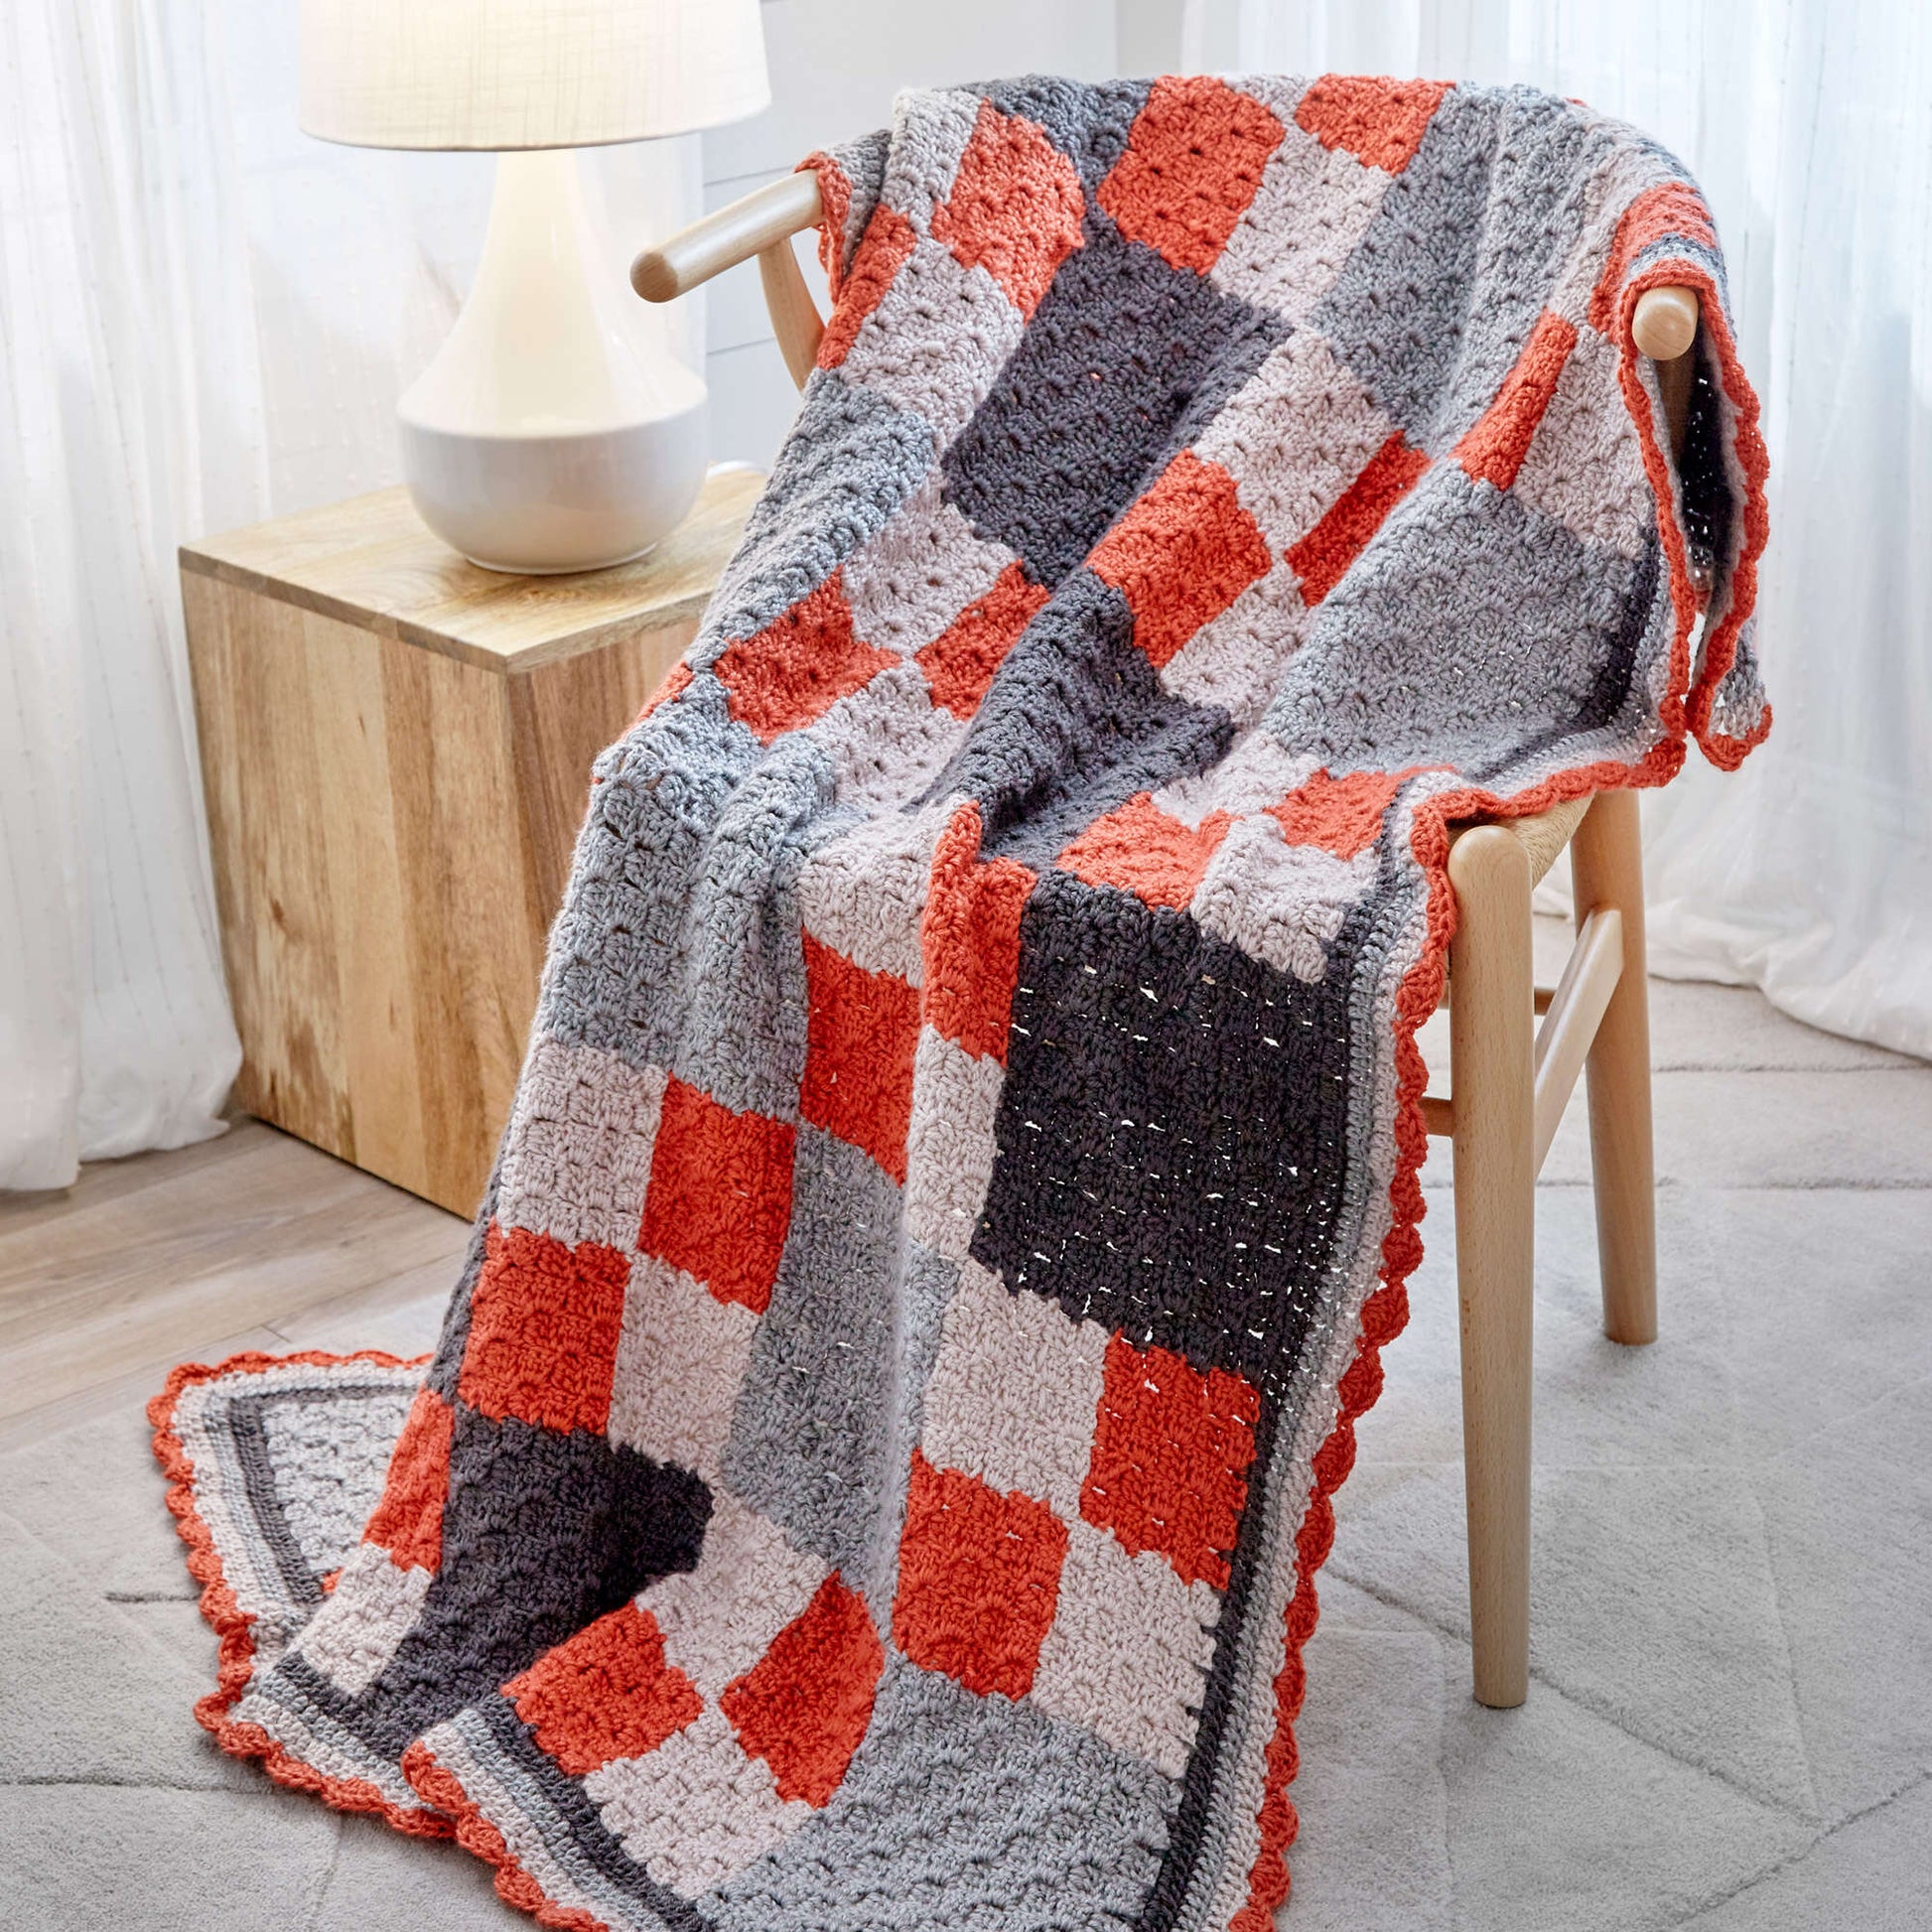 Free Red Heart Four-Patch Throw Crochet Pattern